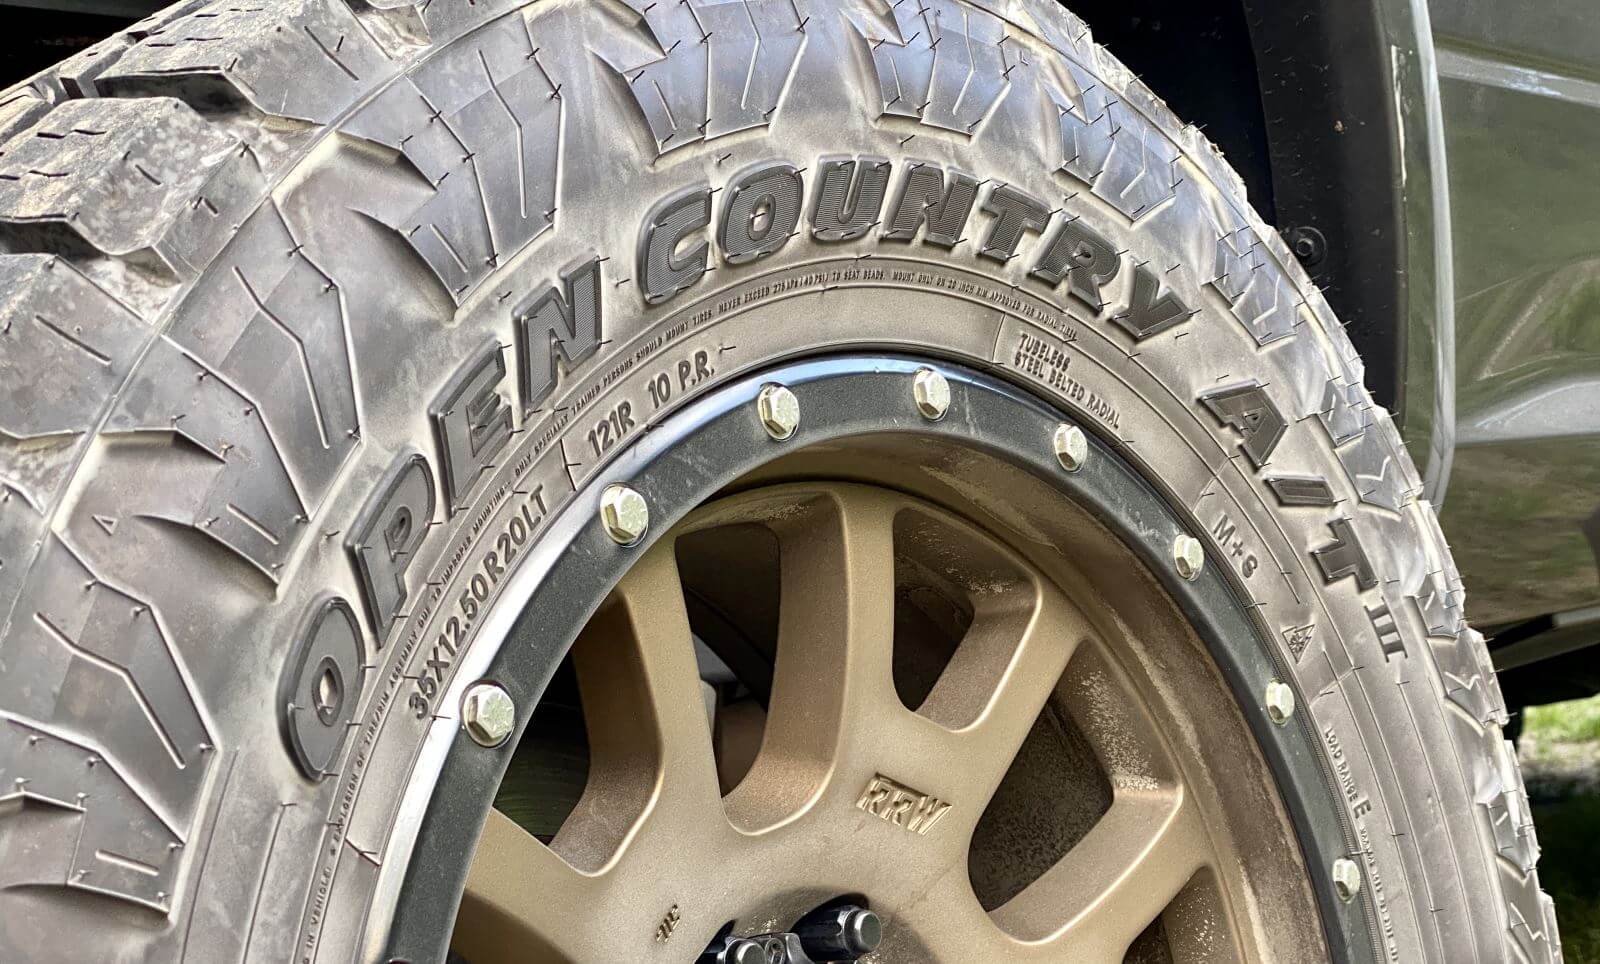 TOYO® OPEN COUNTRY A/T III - 235/70R16 106T